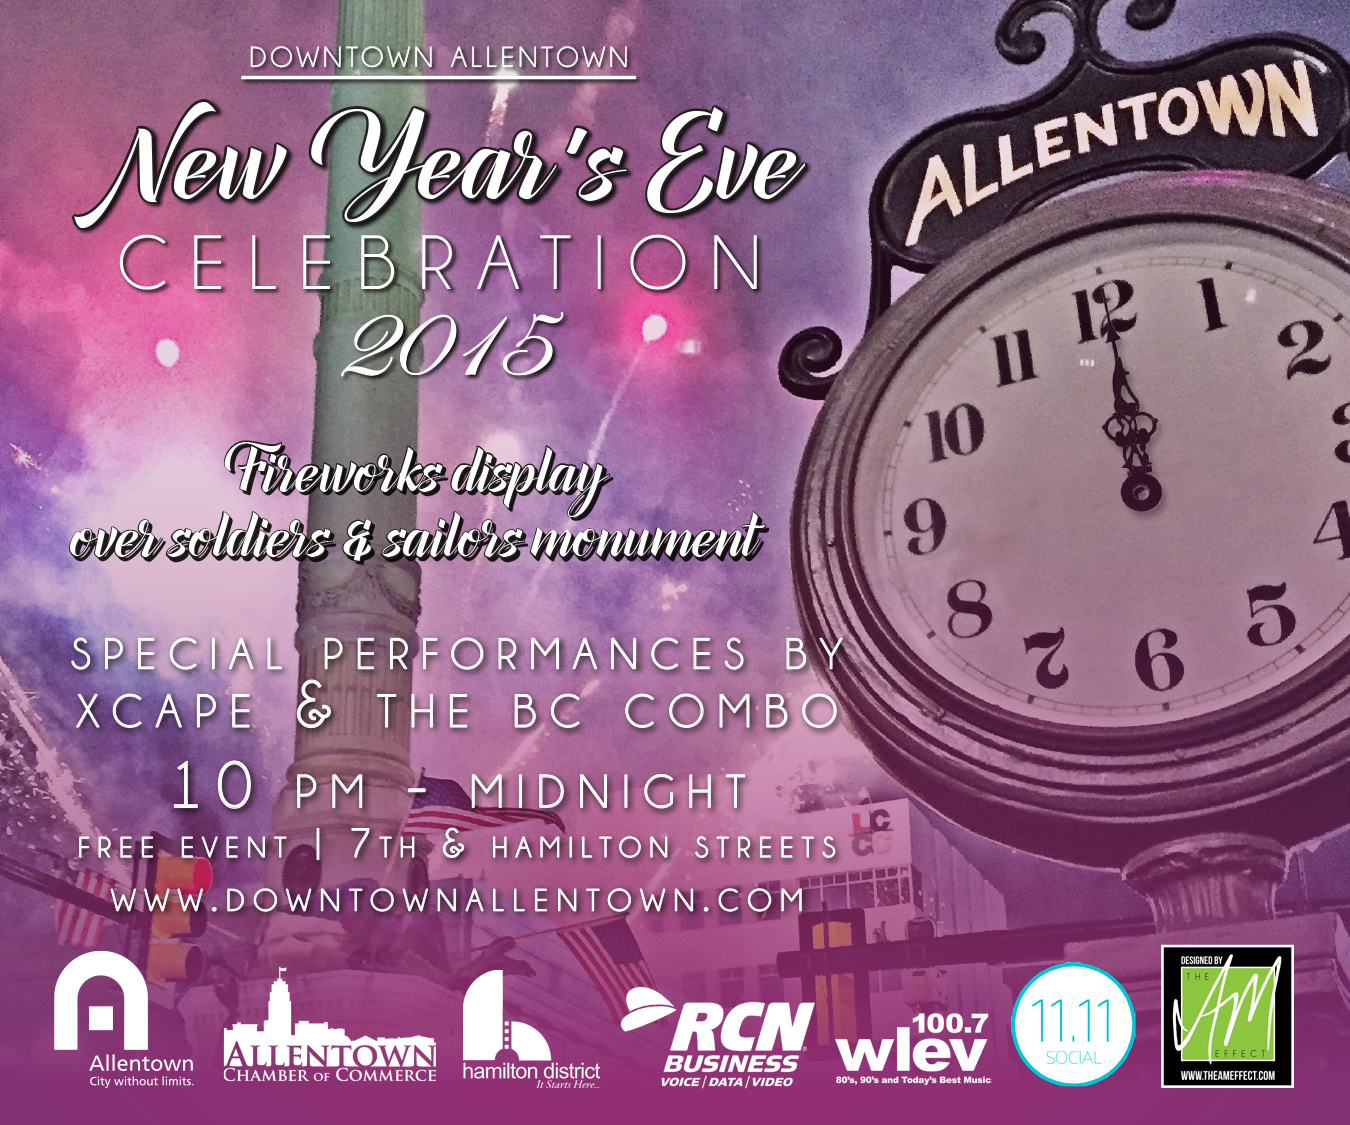 Downtown Allentown New Year's Eve Celebration Greater Lehigh Valley